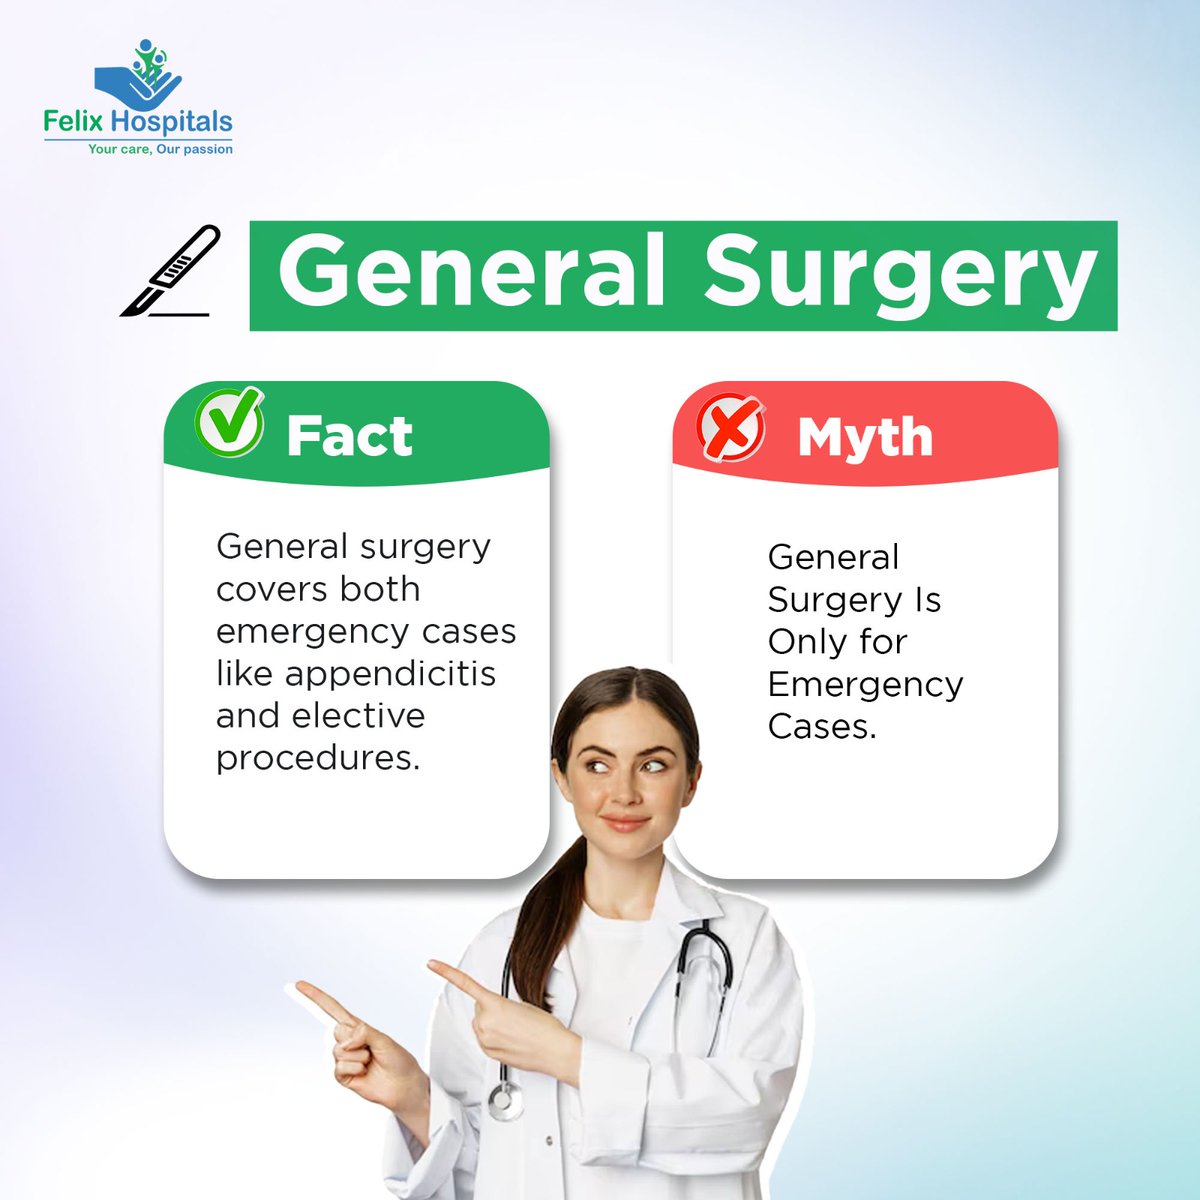 General surgeons are experts in a wide range of surgeries, not just emergencies. From hernia repair to breast surgery, they handle both routine and complex procedures. 

#surgery #mythandfact #generalsurgery #myths #facts #factsyoudidntknow #besthospitalinnoida #hospitalnear